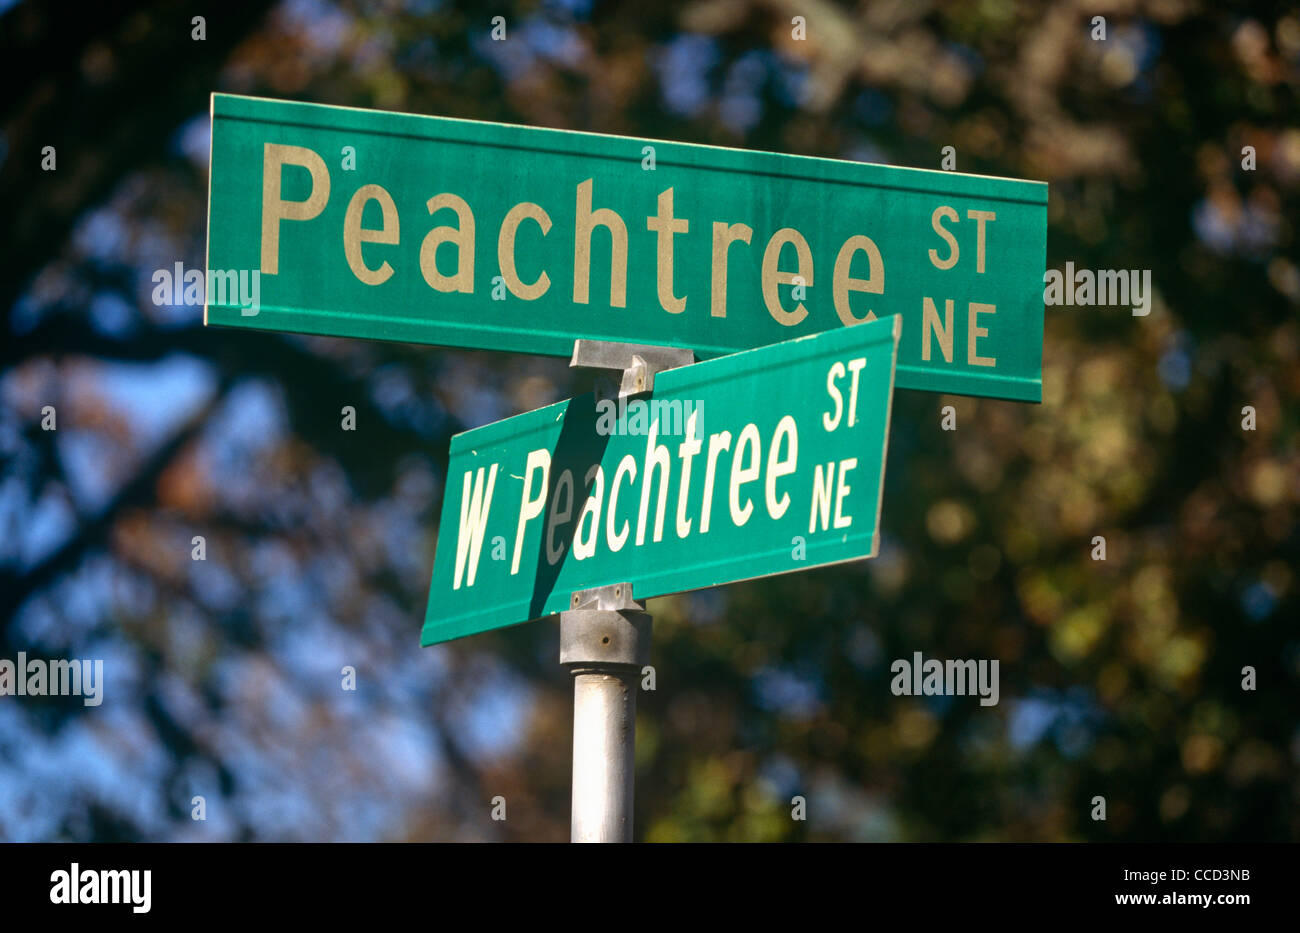 A confusing pair of street signs showing two of the 71 Peachtree street and road names known in Atlanta. Stock Photo